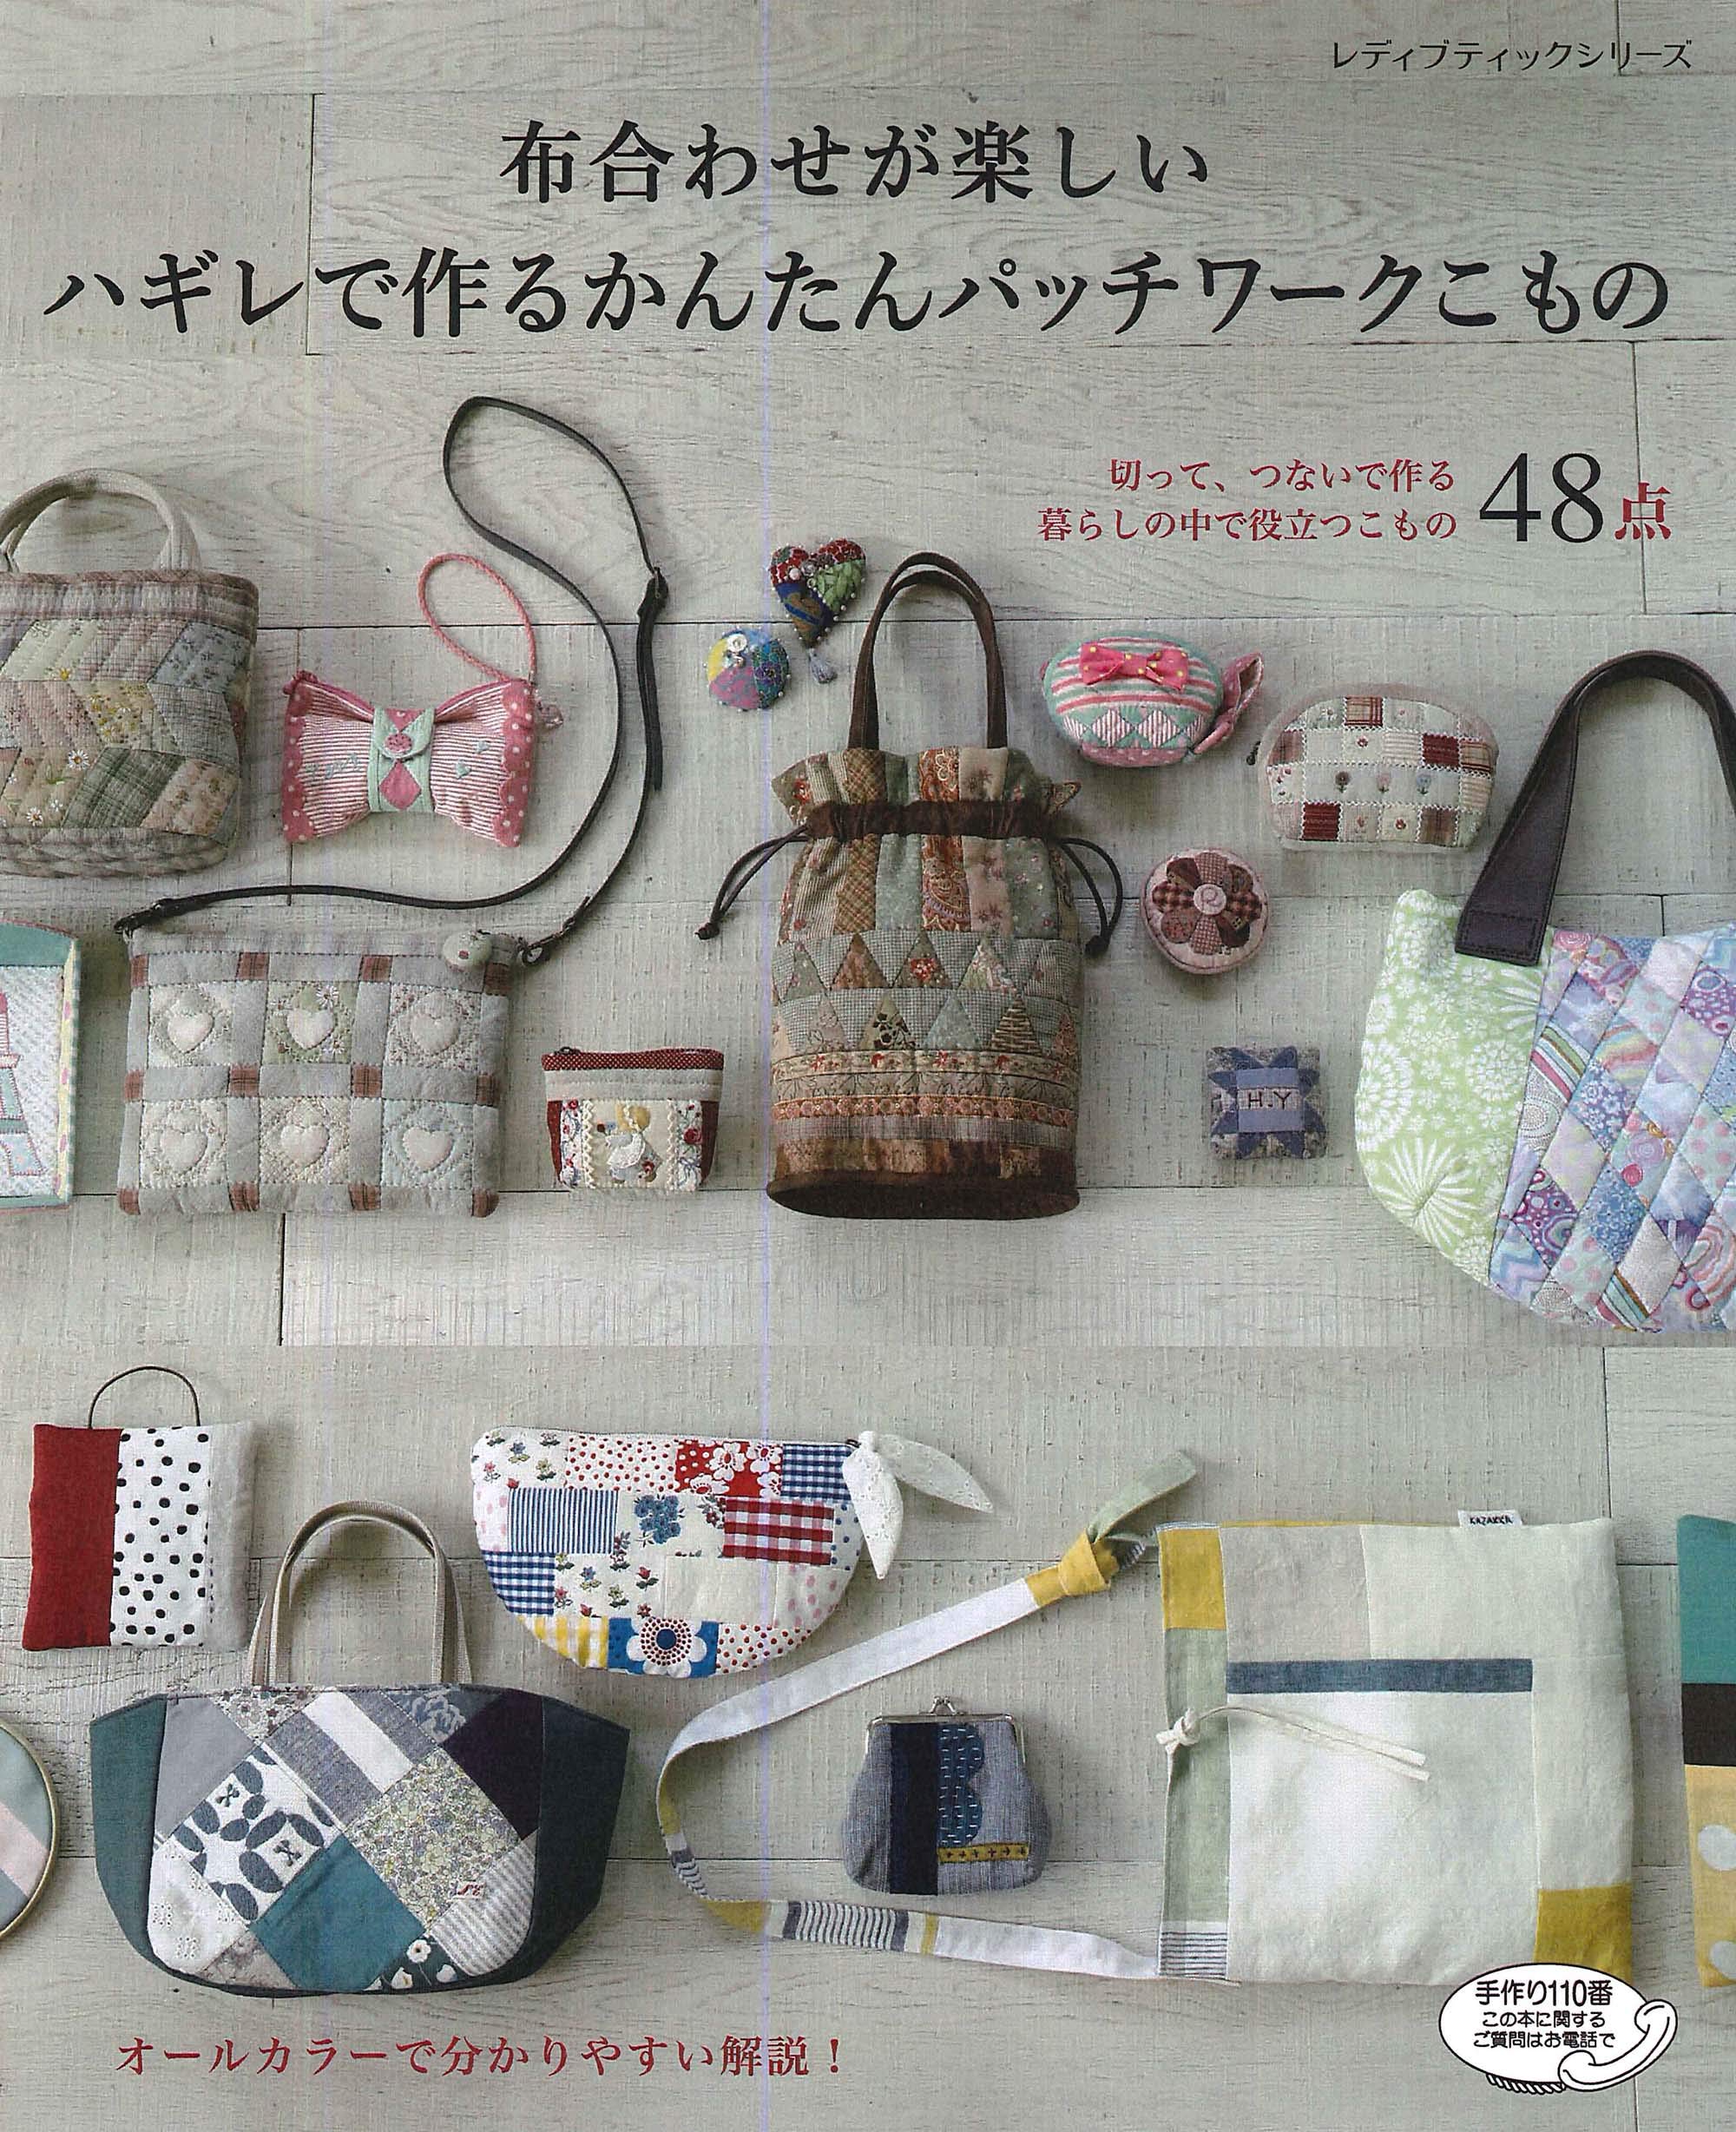 Easy patchwork accessories made of crisp